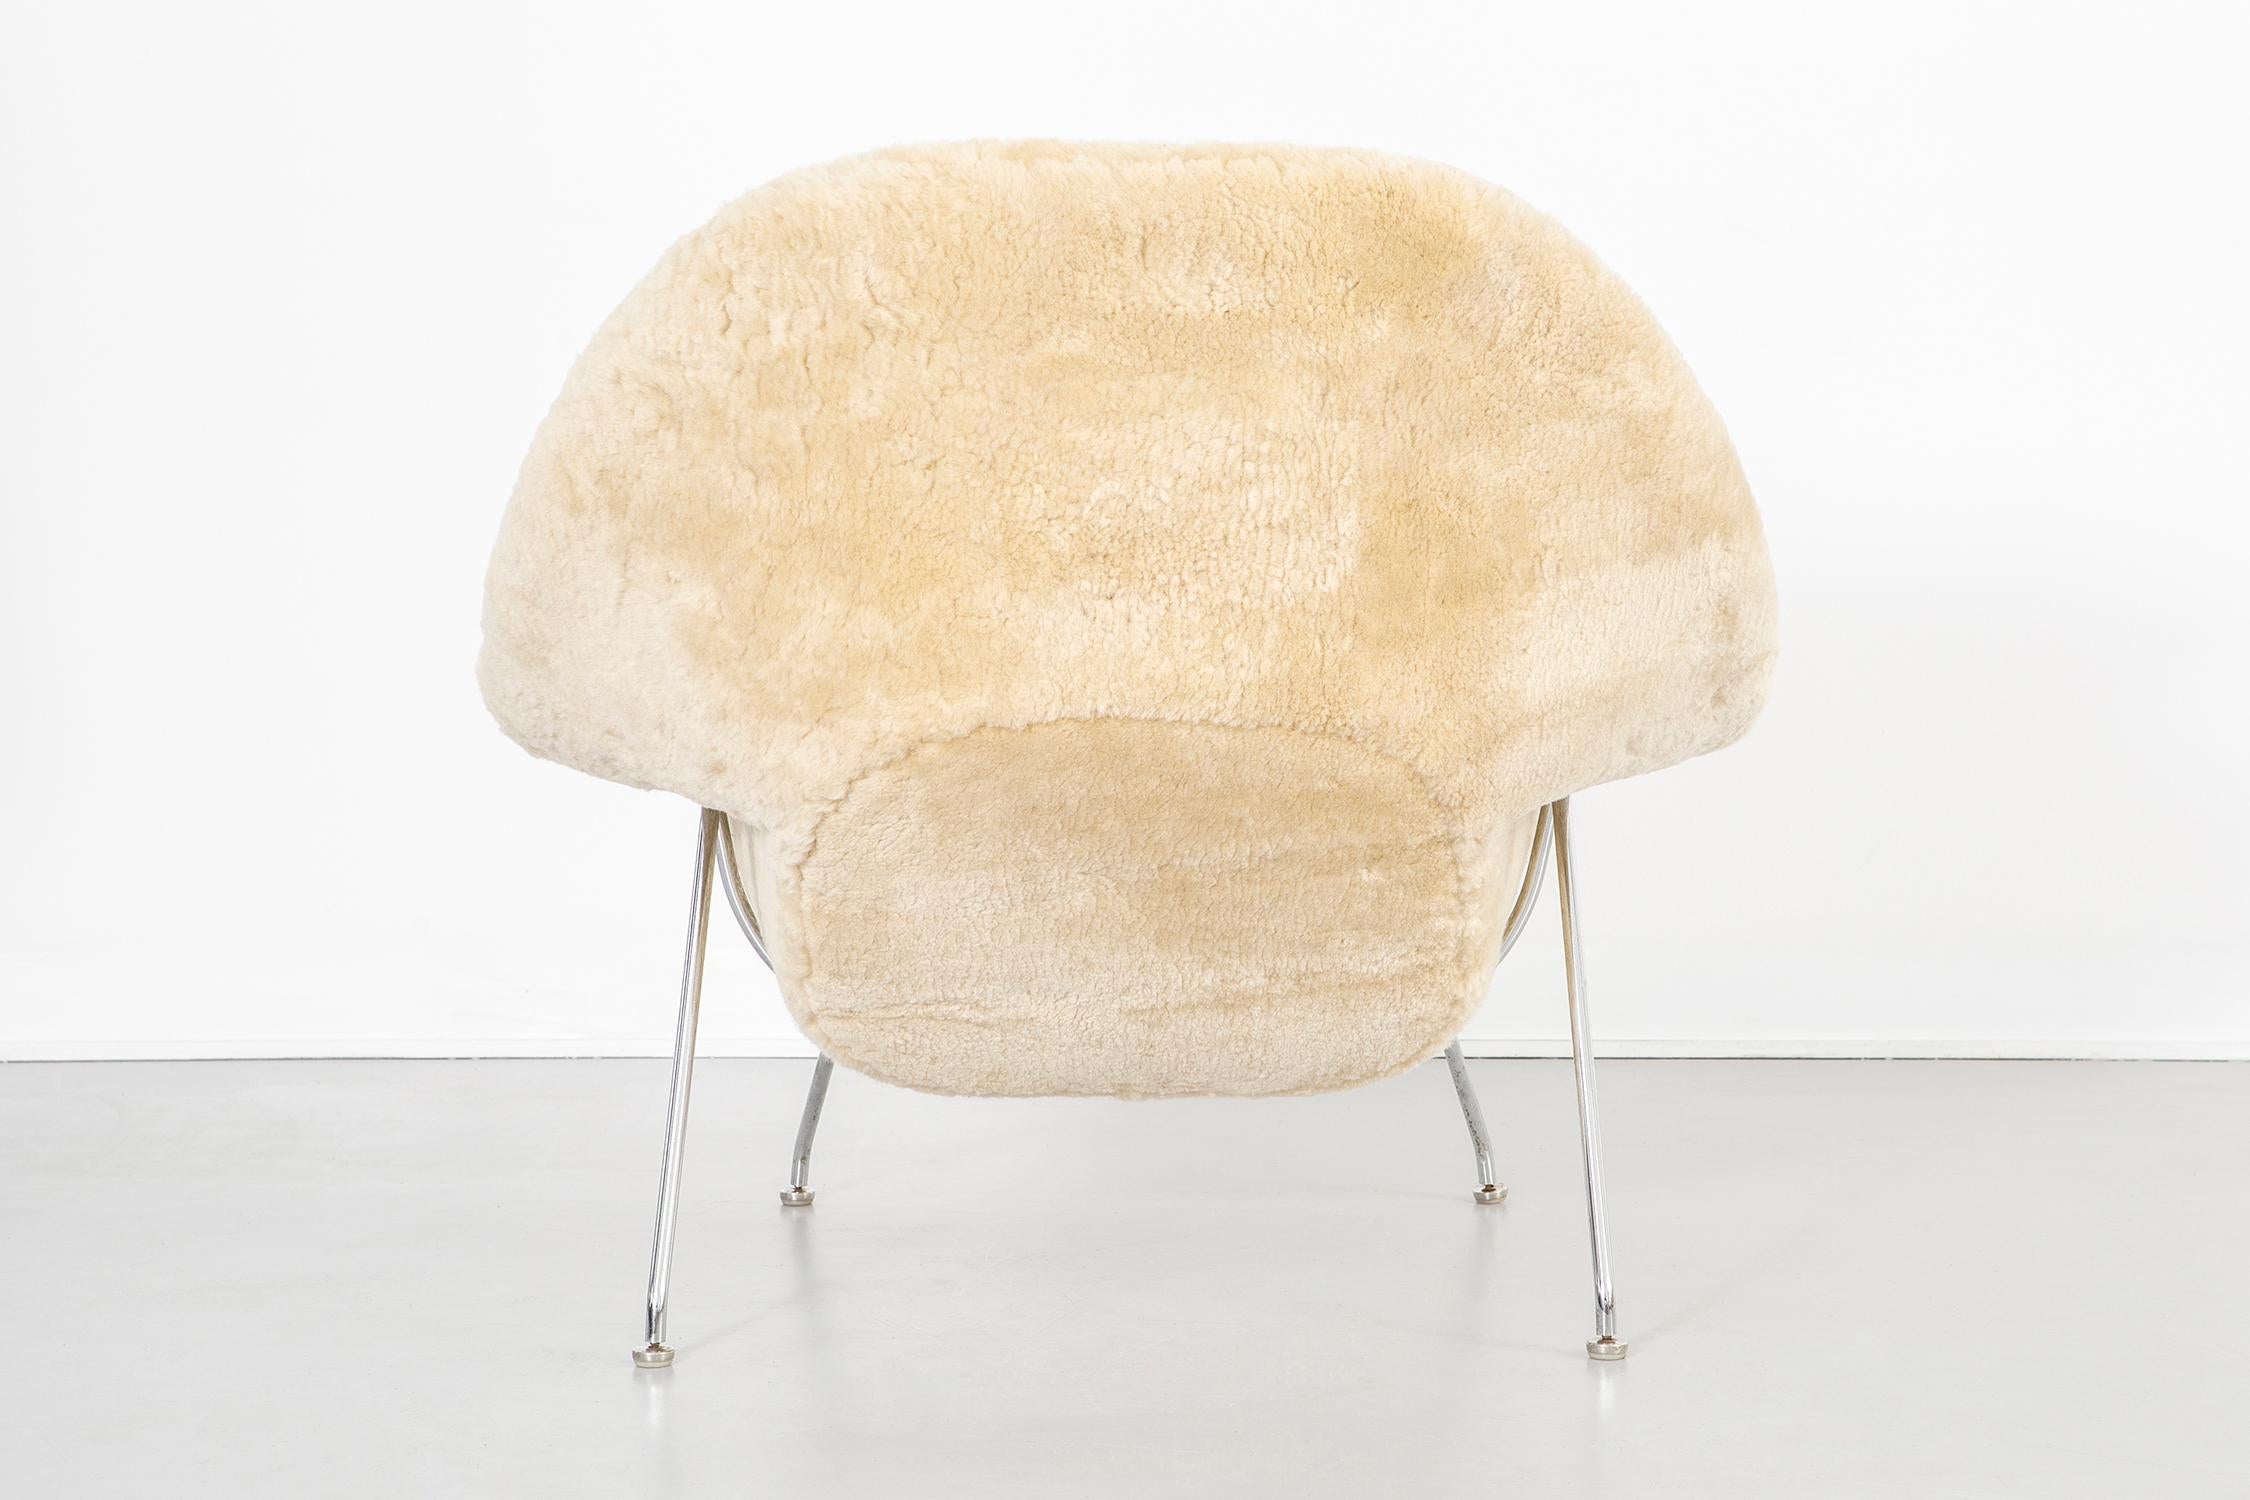 Steel Mid-Century Modern Eero Saarinen for Knoll Womb Chair Reupholstered in Shearling For Sale